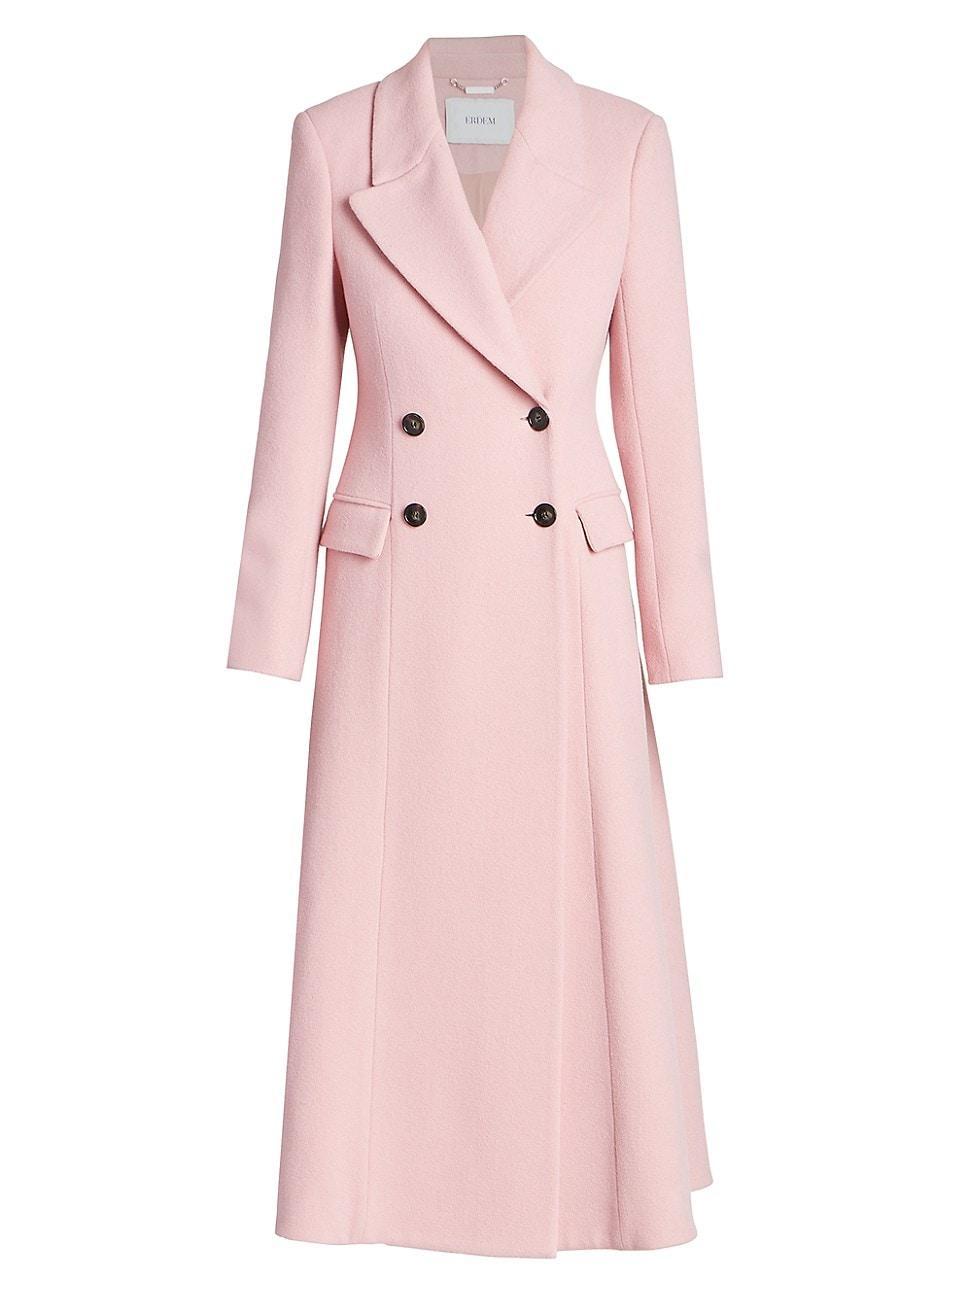 Womens Wool & Cashmere-Blend Coat Product Image